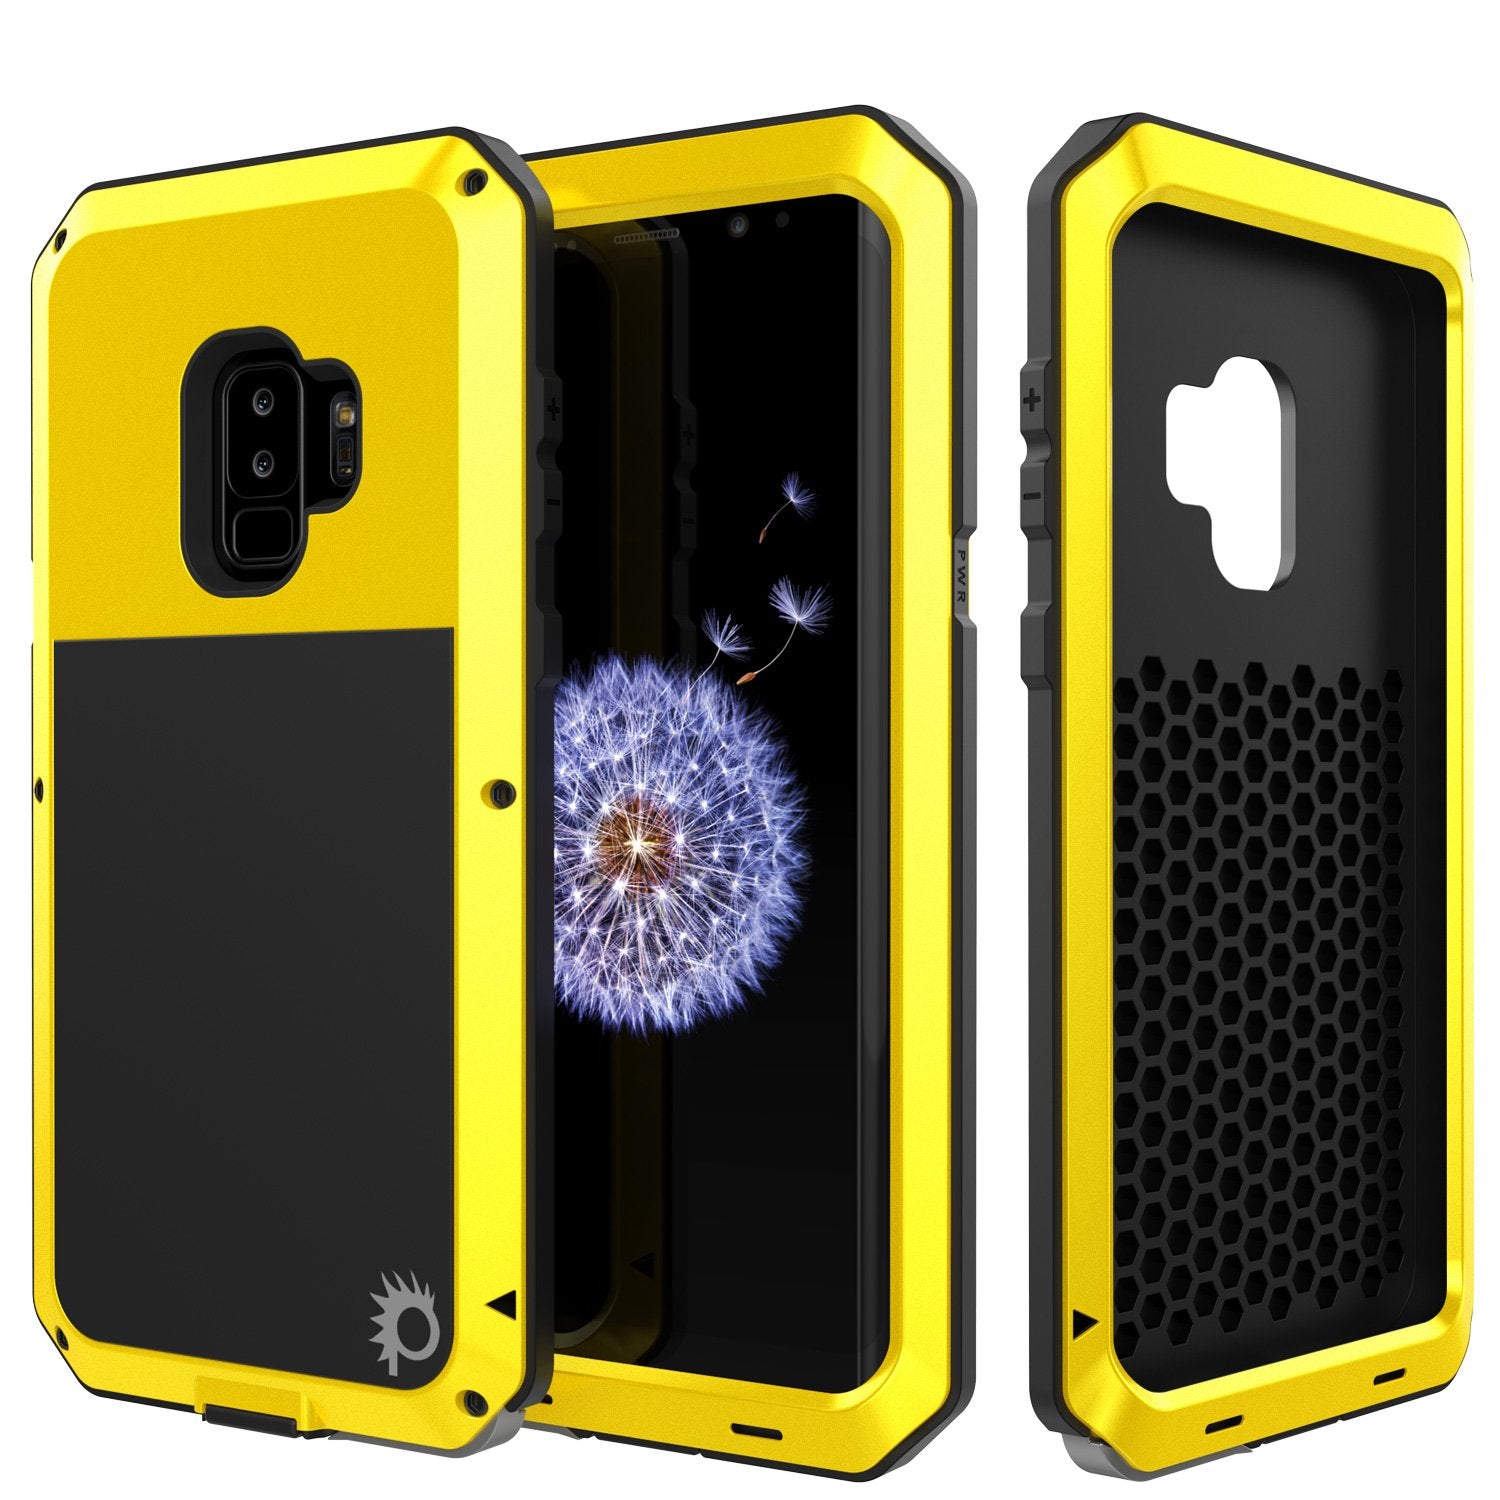 Galaxy S9 Plus Metal Case, Heavy Duty Military Grade Rugged Armor Cover [shock proof] Hybrid Full Body Hard Aluminum & TPU Design [non slip] W/ Prime Drop Protection for Samsung Galaxy S9 Plus [Neon]